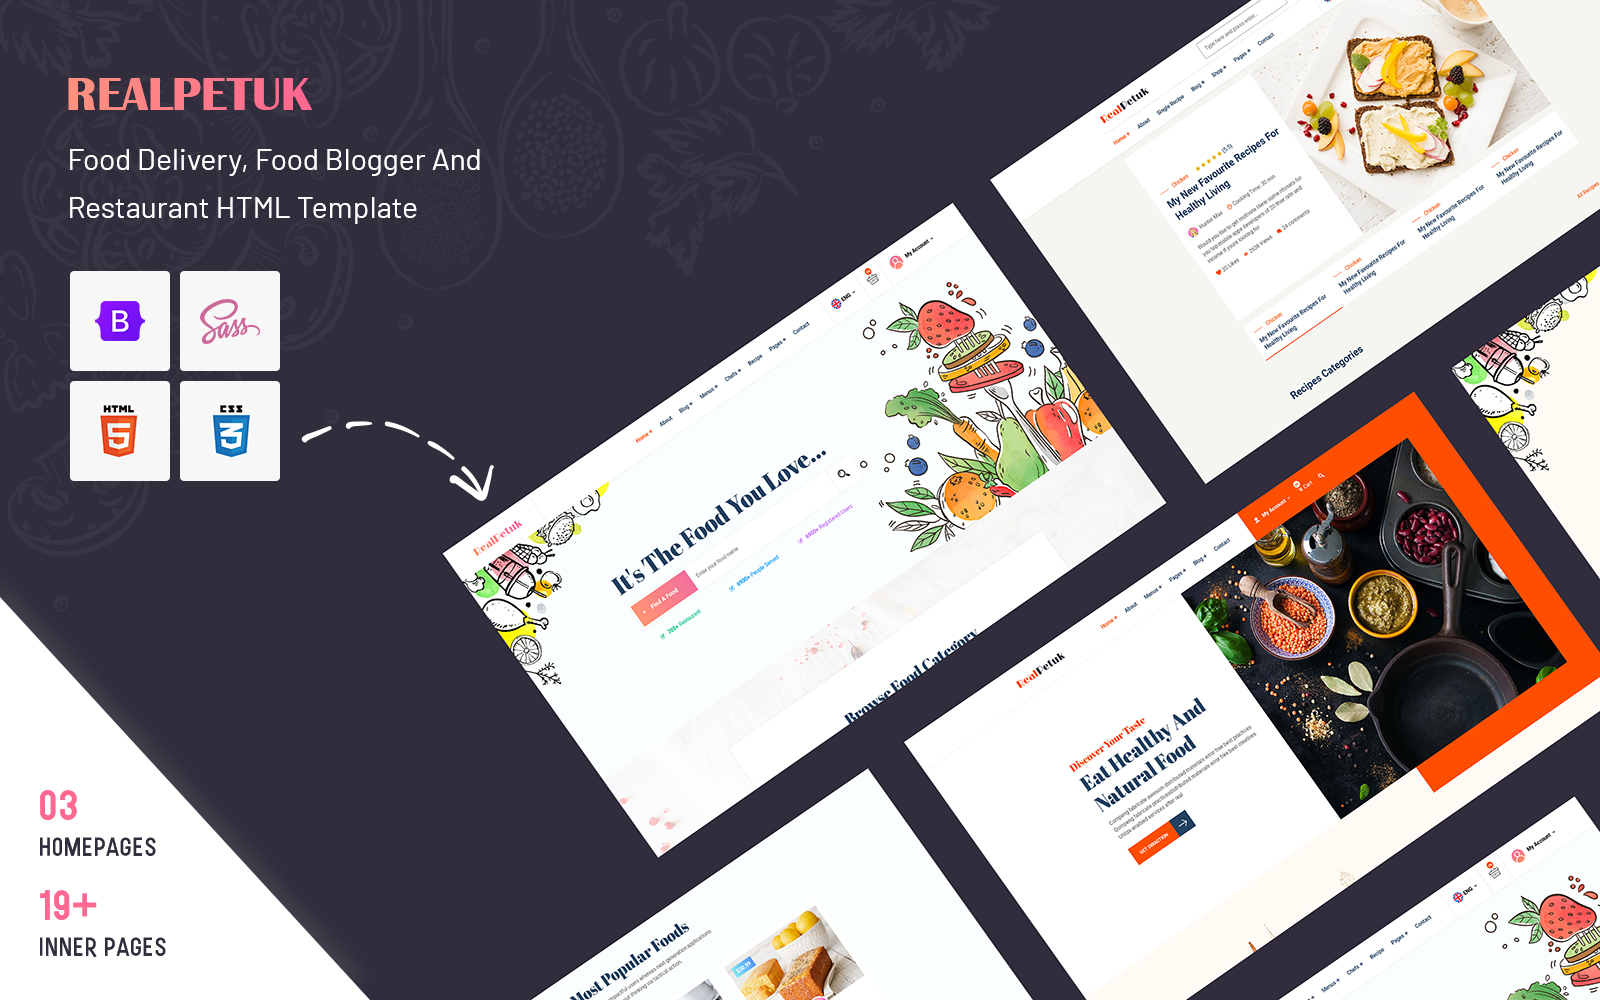 Realpetuk - Food Delivery, Food Blogger and Restaurant HTML Template